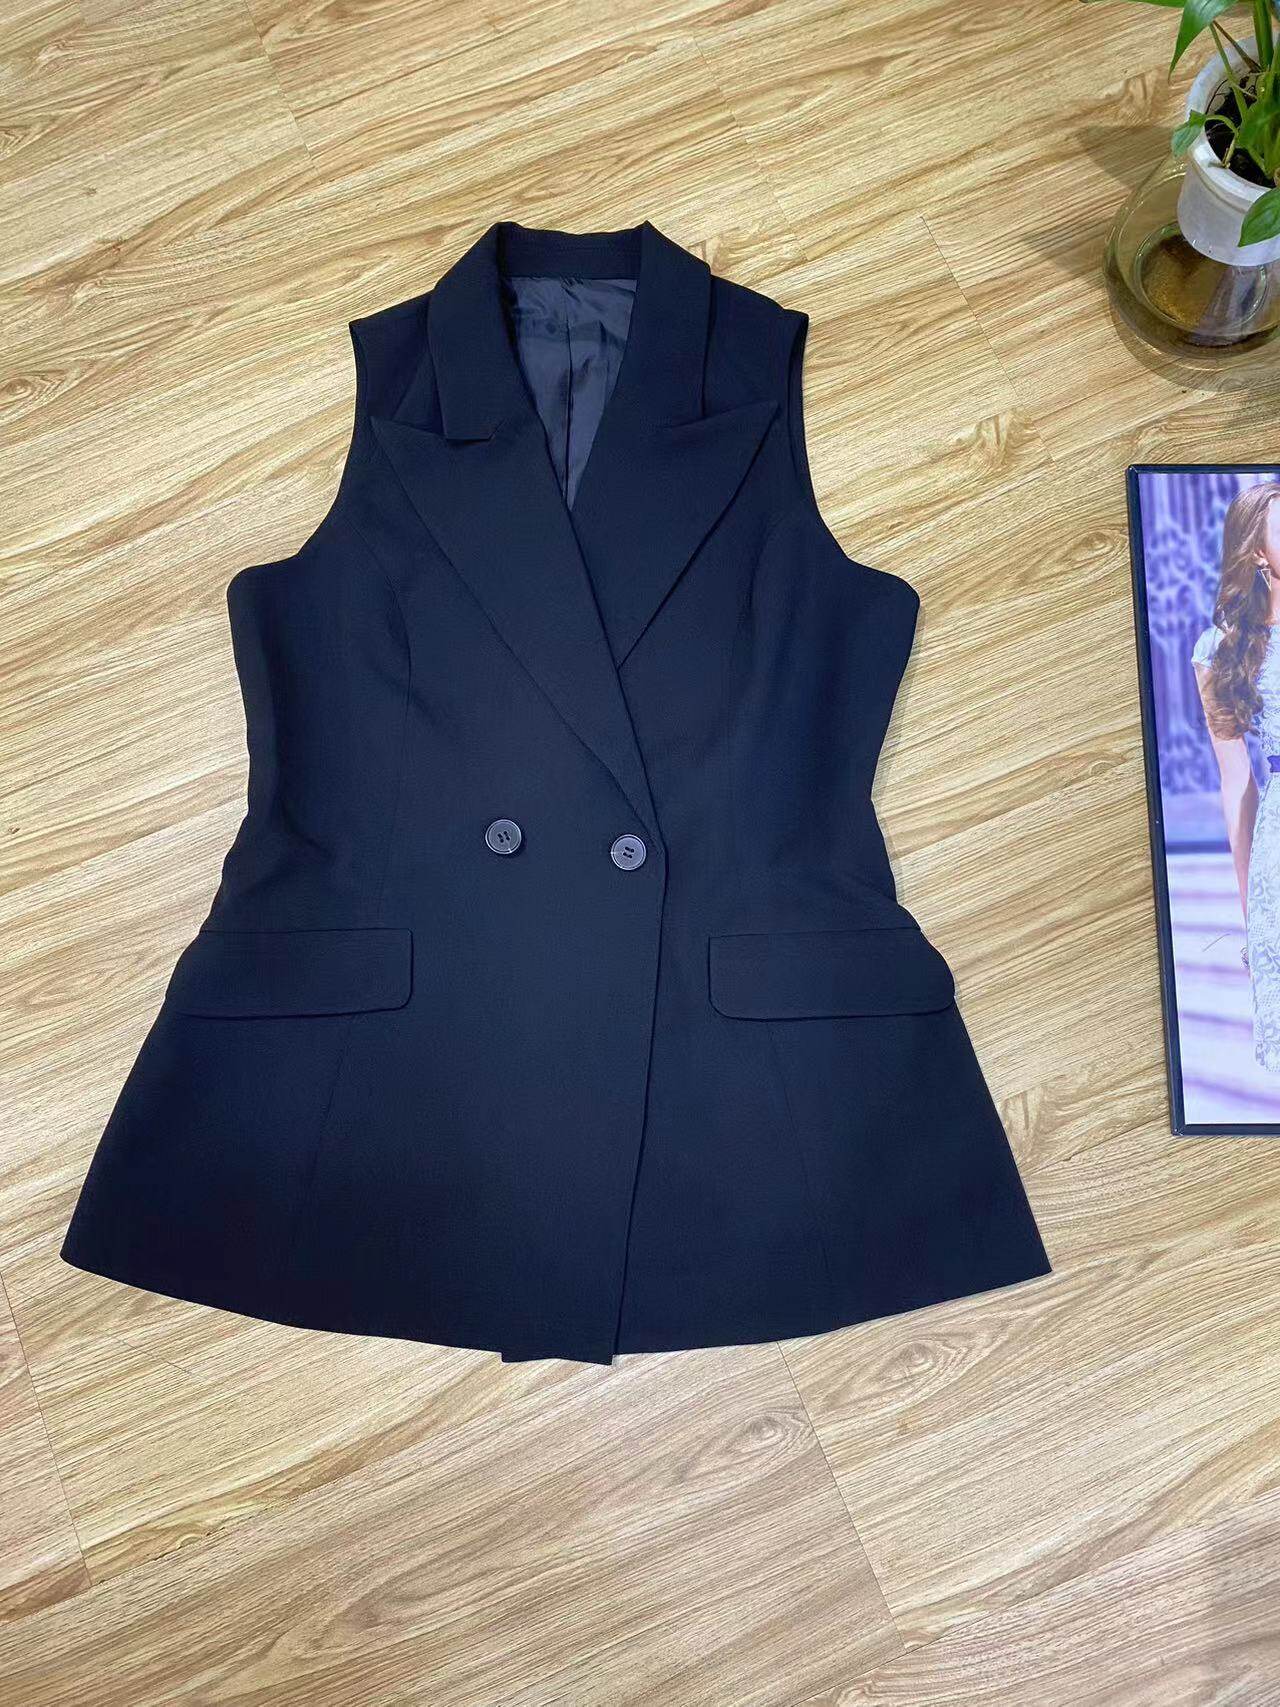 Wrap up waist for a slimmer look paired with a black sleeveless vest style suit